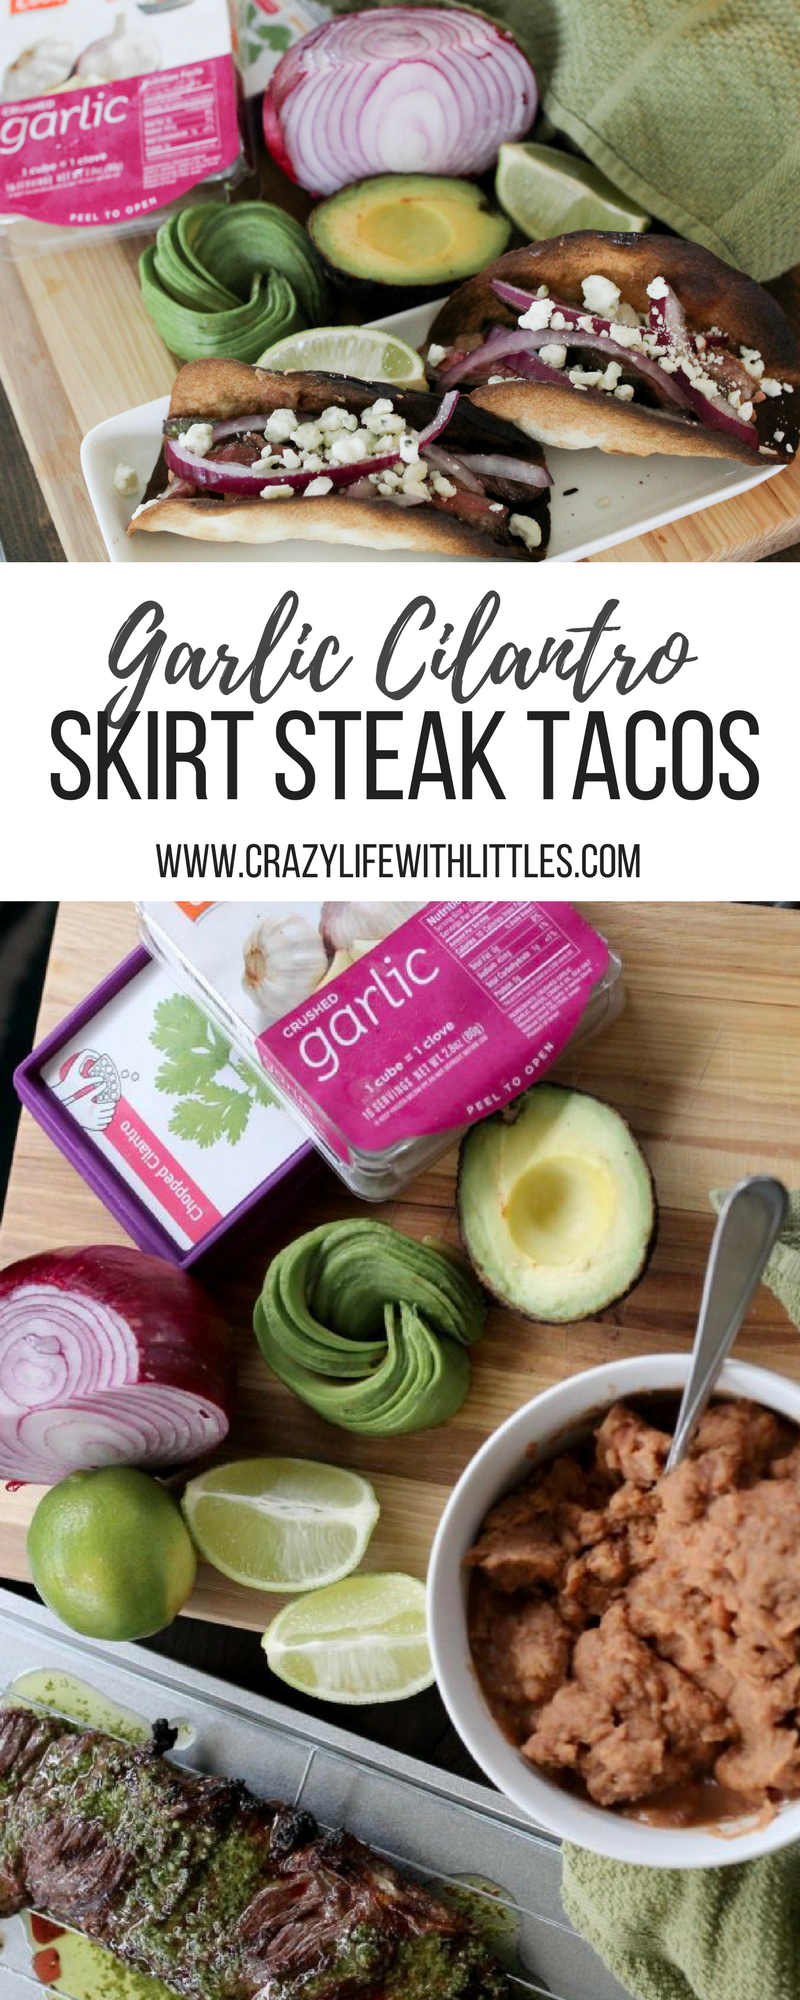 Easy Grilled Skirt Steak Tacos with a Garlic Cilantro Sauce. Grab Pop and Cook Crushed Garlic and Chopped Cilantro in the Frozen Vegetable aisle sold exclusively at Walmart.